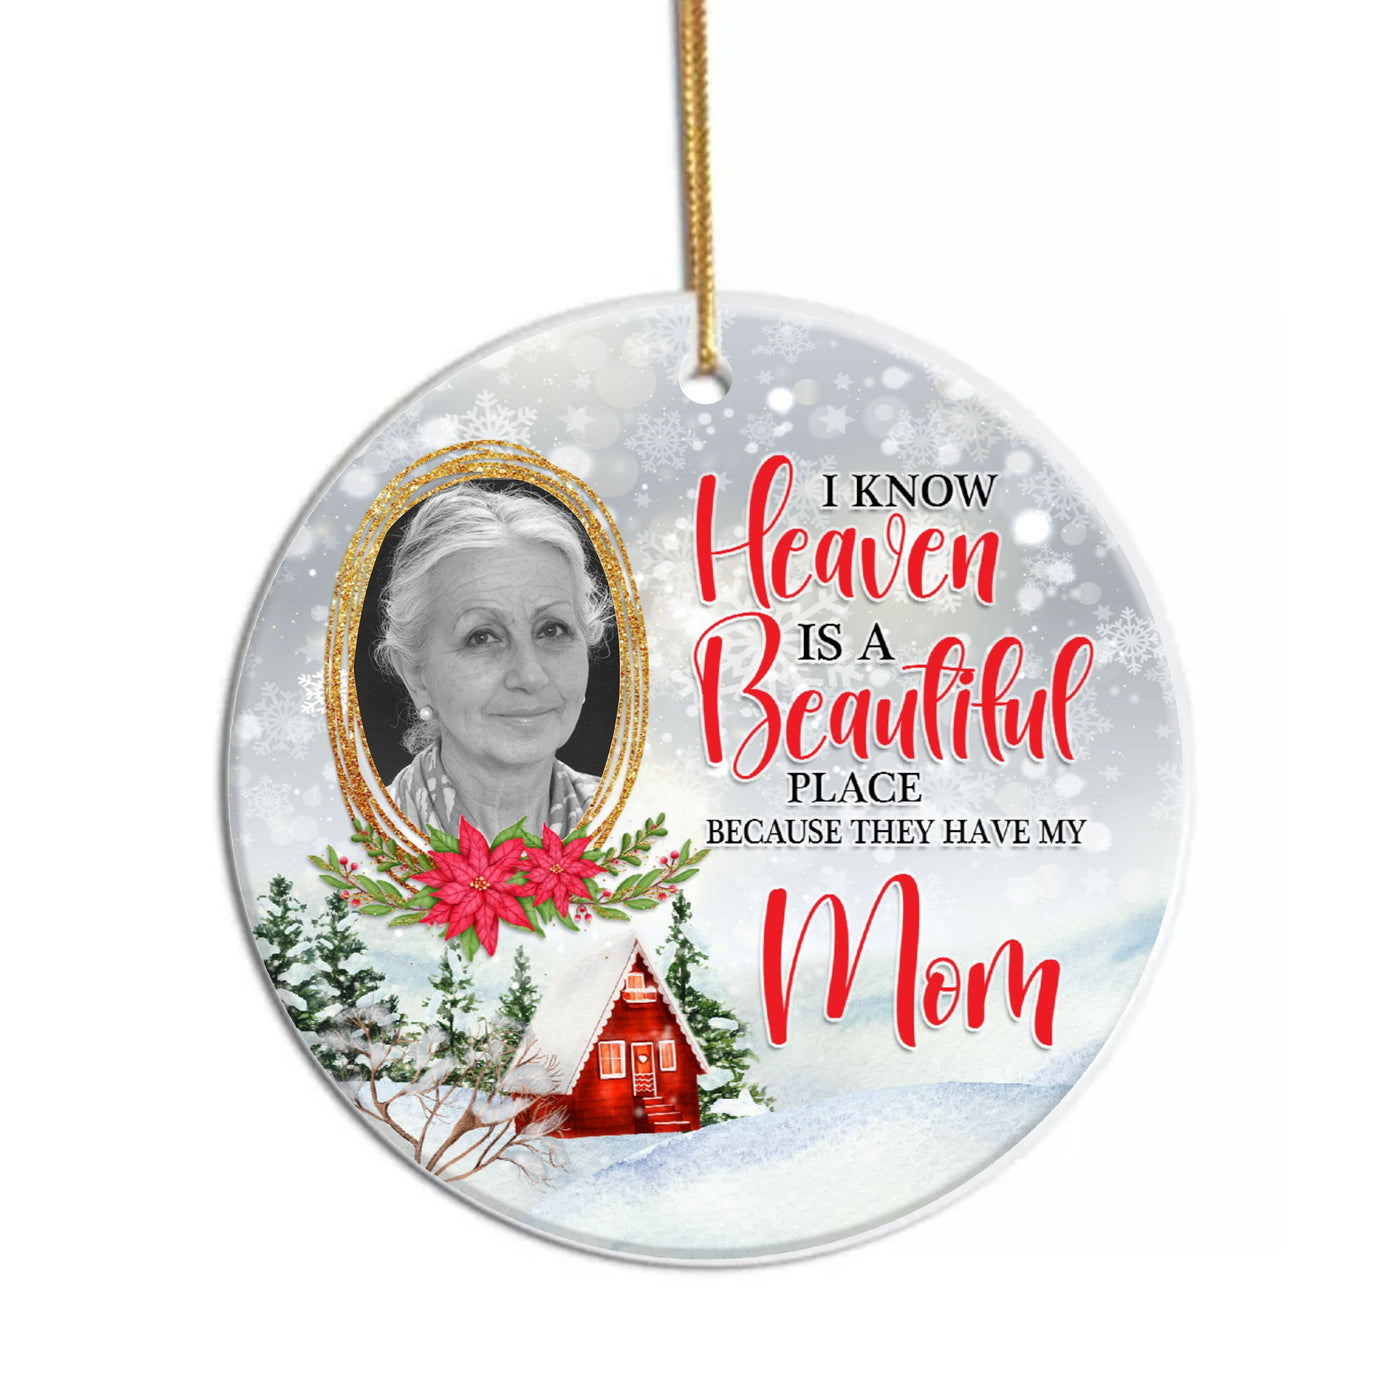 Heaven is a Beautiful Place Christmas Ceramic 3" Round Ornament-Personalized Christmas Ornament For Family Members and Friends From Heaven